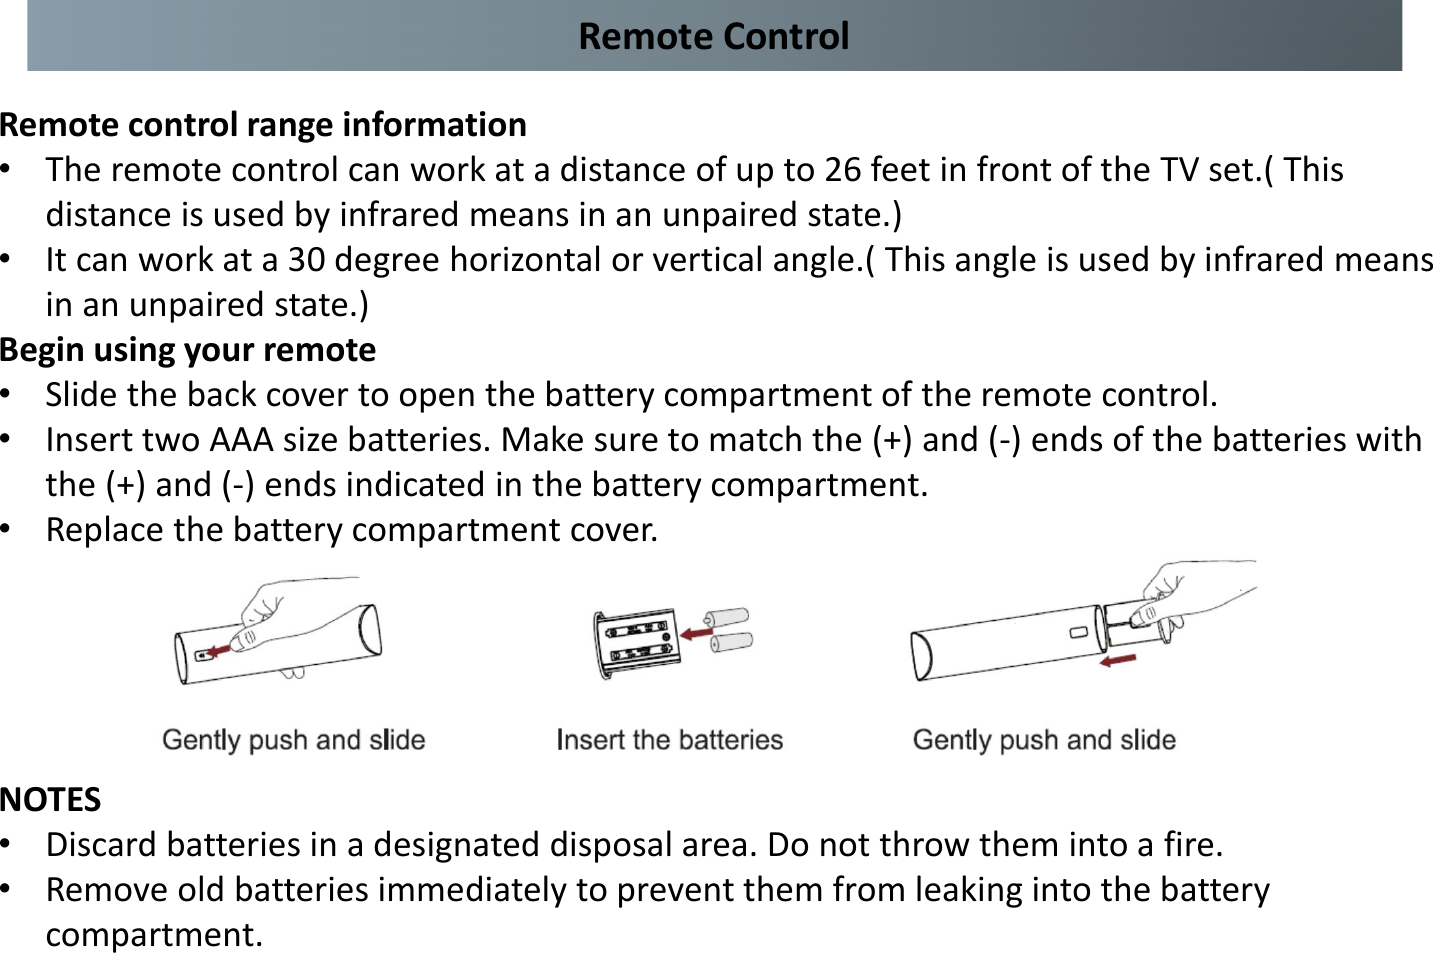 Remote control range information •The remote control can work at a distance of up to 26 feet in front of the TV set.( This distance is used by infrared means in an unpaired state.) •It can work at a 30 degree horizontal or vertical angle.( This angle is used by infrared means in an unpaired state.) Begin using your remote •Slide the back cover to open the battery compartment of the remote control. •Insert two AAA size batteries. Make sure to match the (+) and (-) ends of the batteries with the (+) and (-) ends indicated in the battery compartment. •Replace the battery compartment cover. NOTES •Discard batteries in a designated disposal area. Do not throw them into a fire. •Remove old batteries immediately to prevent them from leaking into the battery compartment. Remote Control